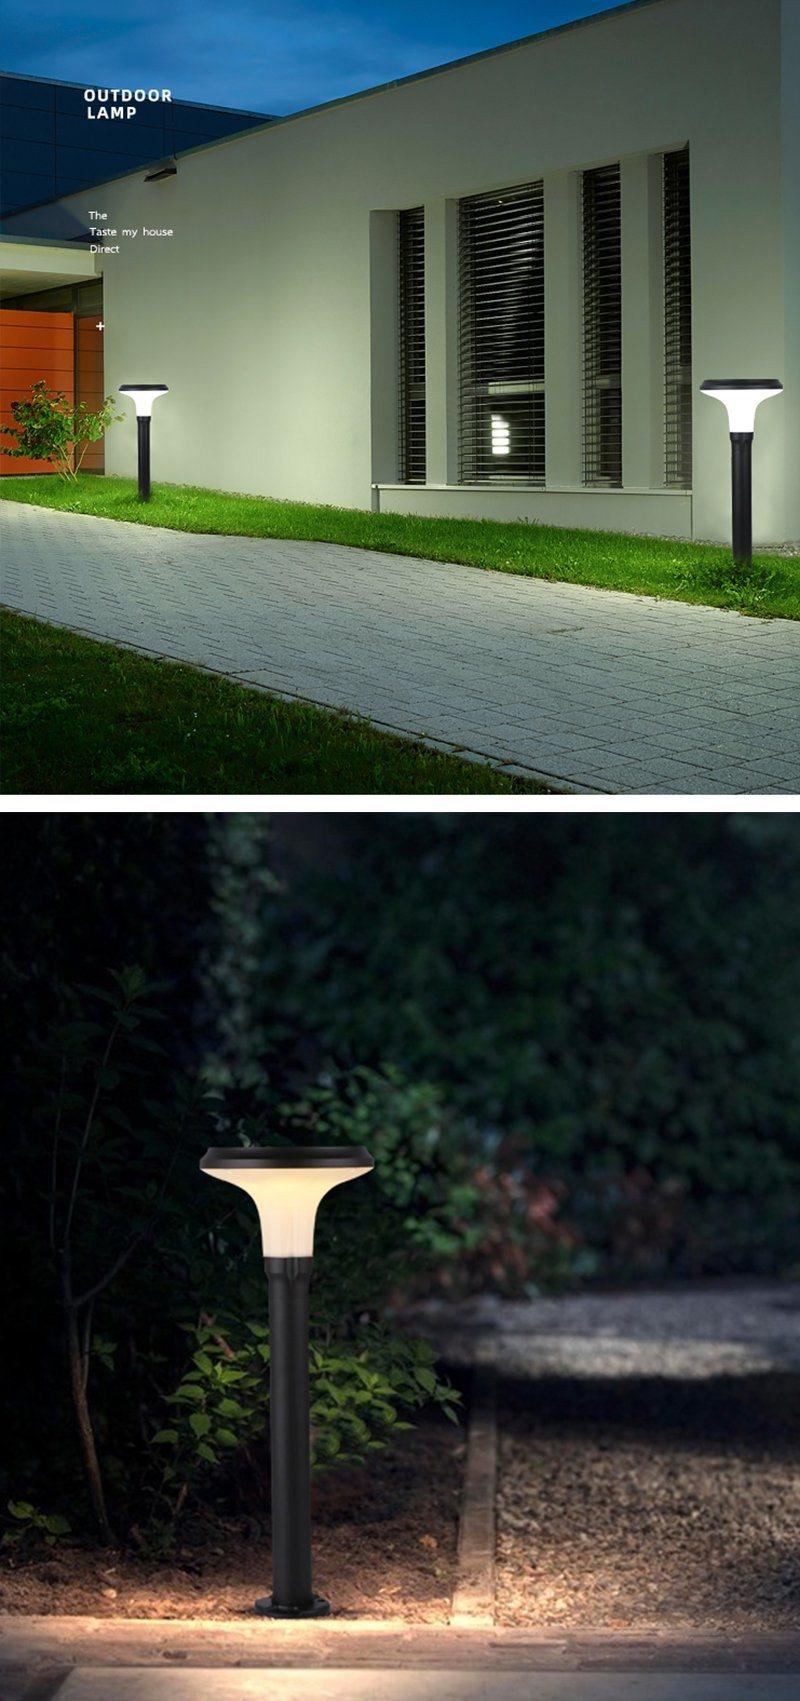 Outdoor Solar Lawn Light Automatic on/off Sensor for Home Lawn Yard Patio Walkway Driveway Pathway